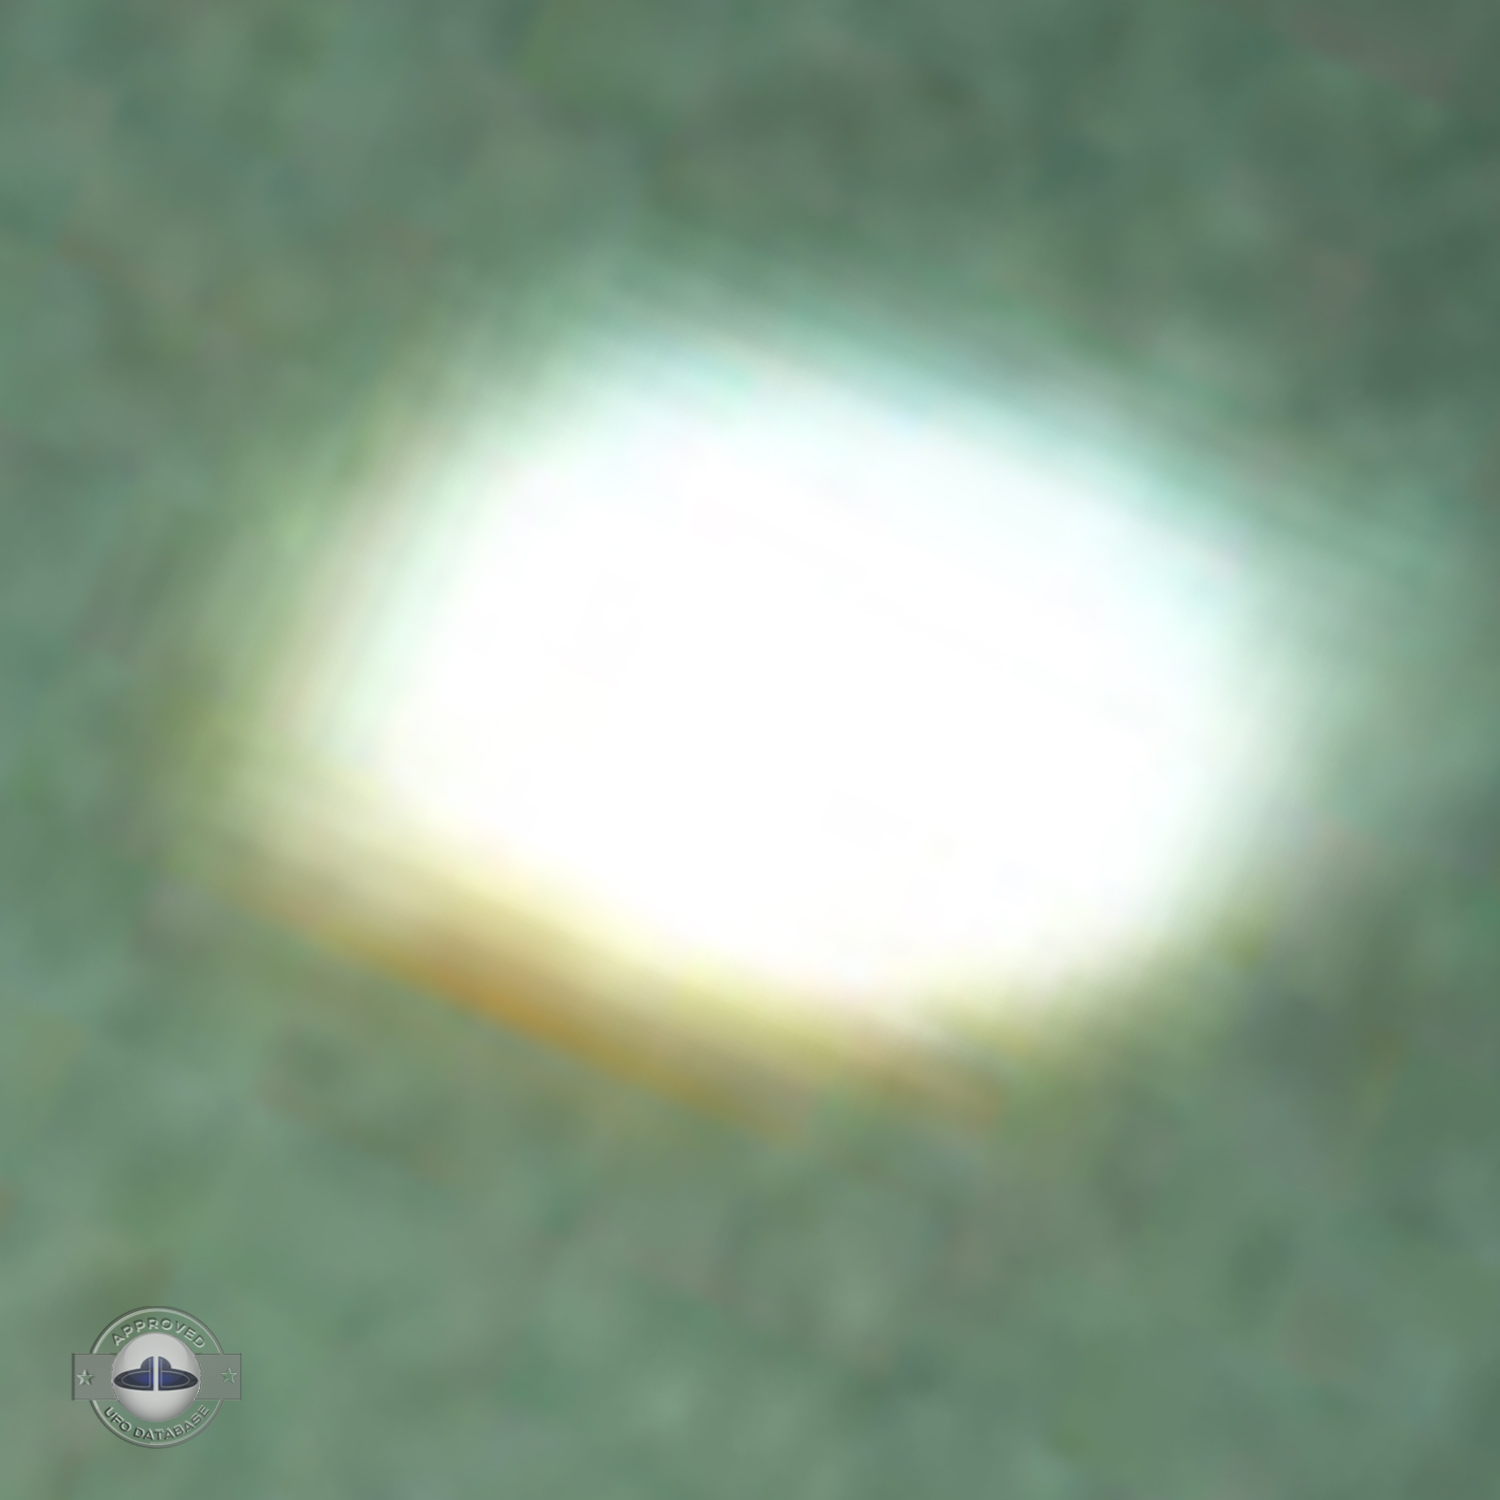 8 UFOs over Ashoka Ashram in Mehrauli India | 1964 | by Billy Meier UFO Picture #177-8